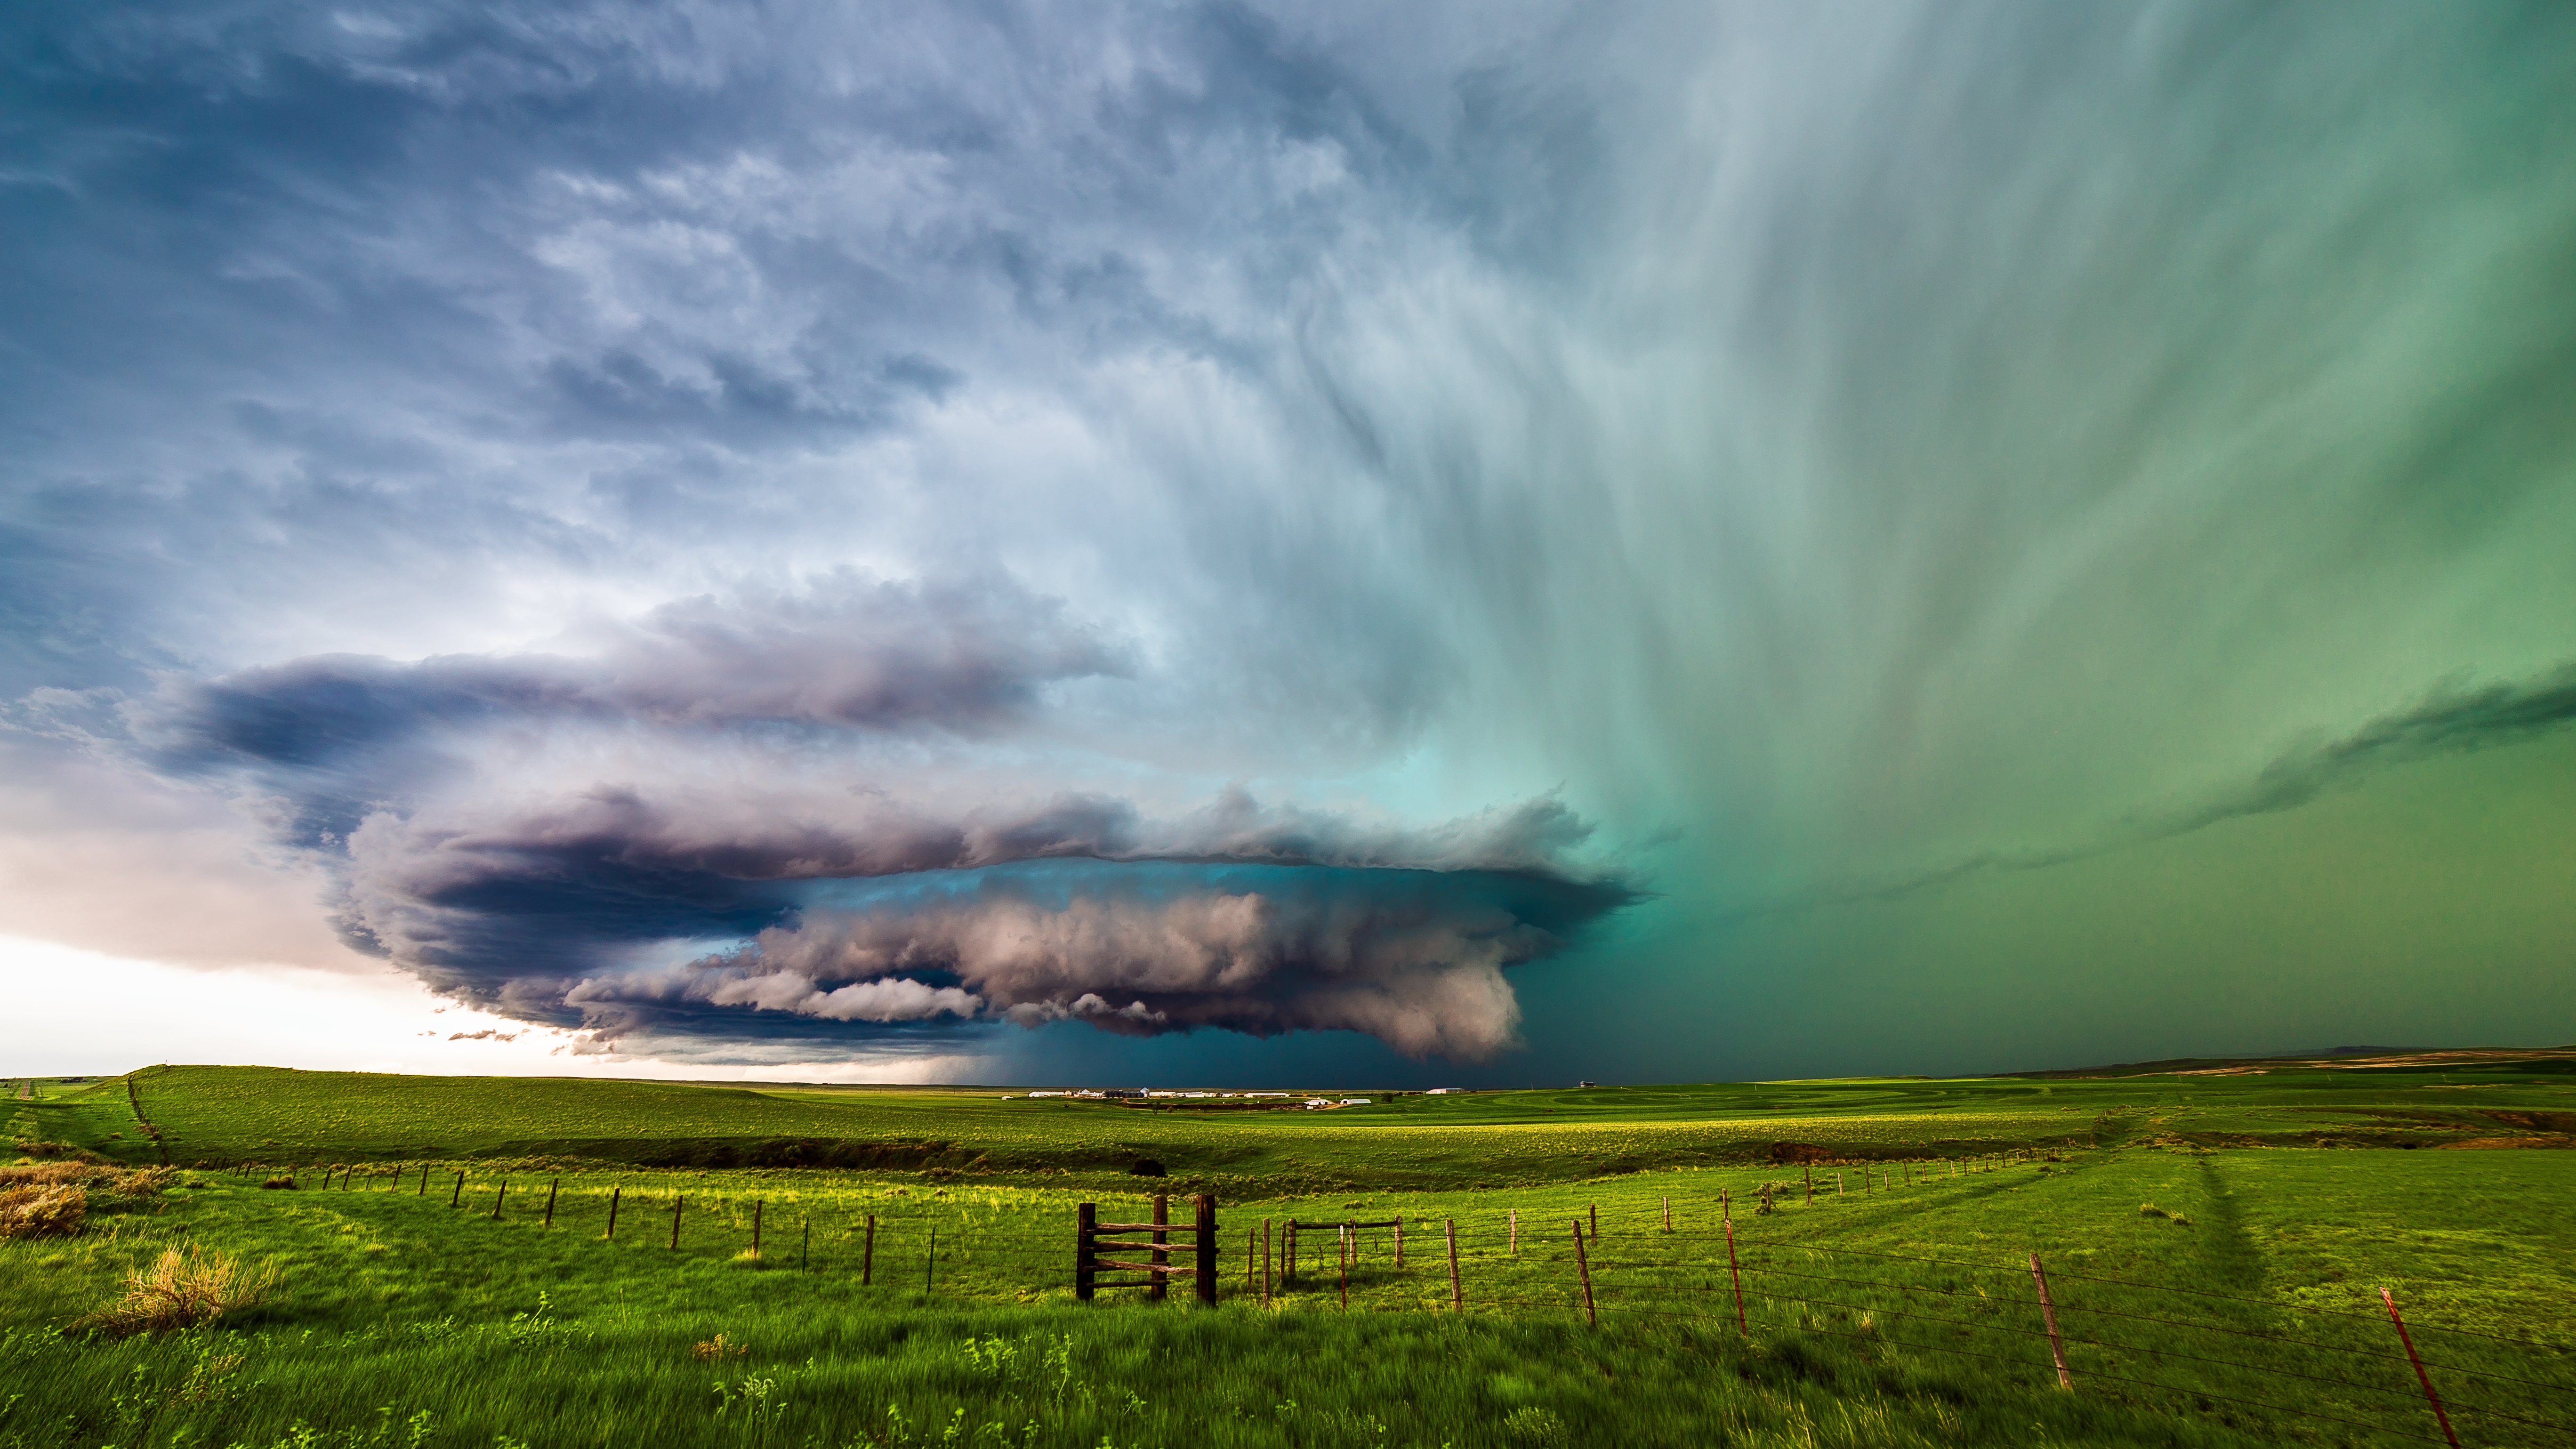 Thunderstorm supercell